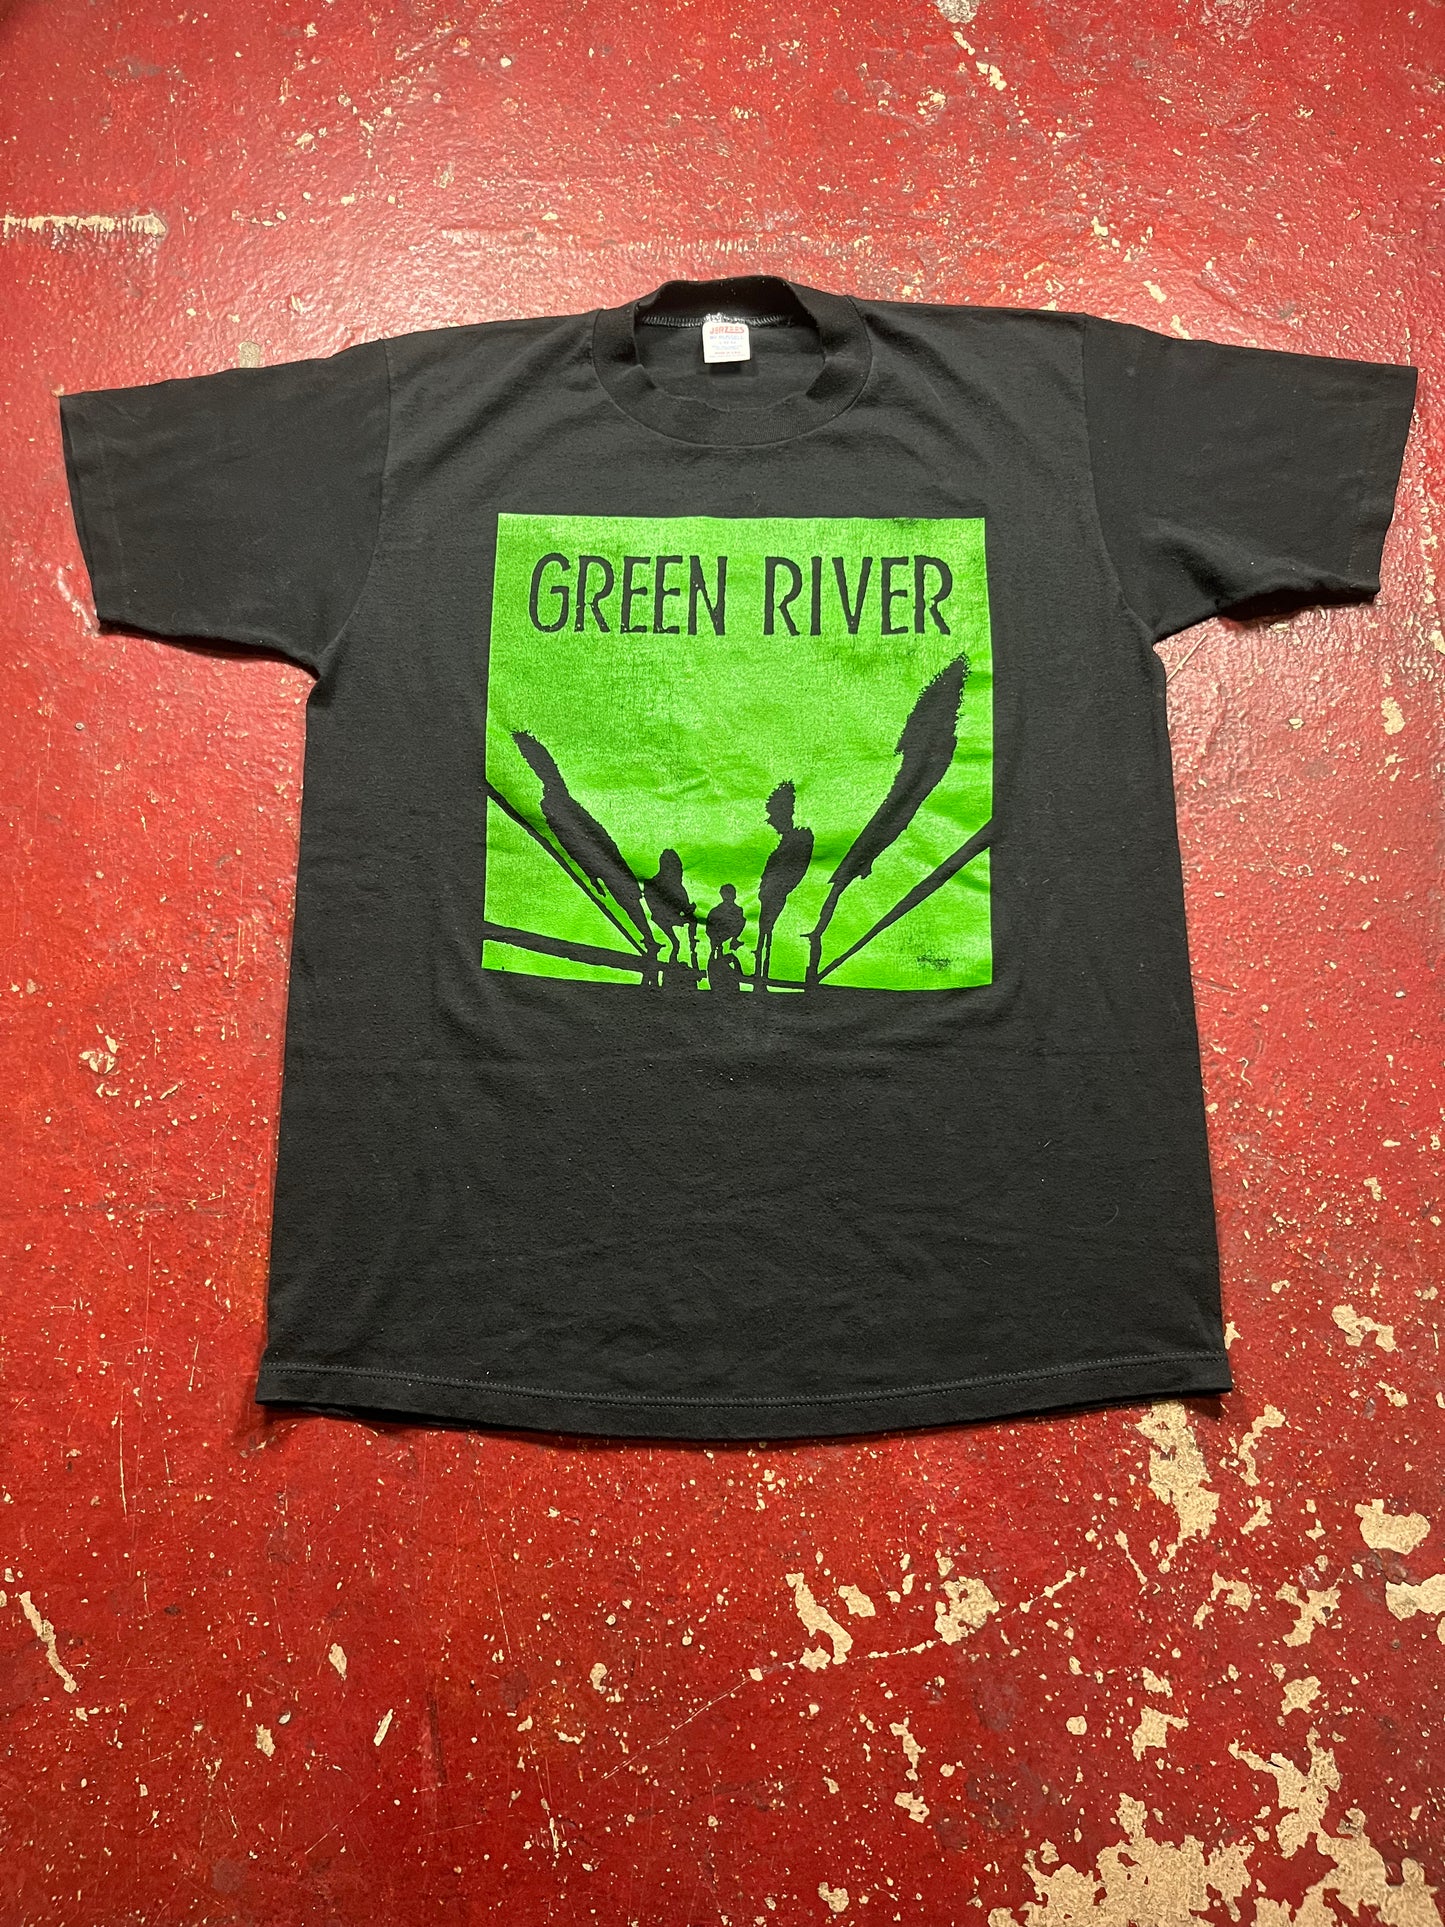 1985 Green River “Come On Down” Tee